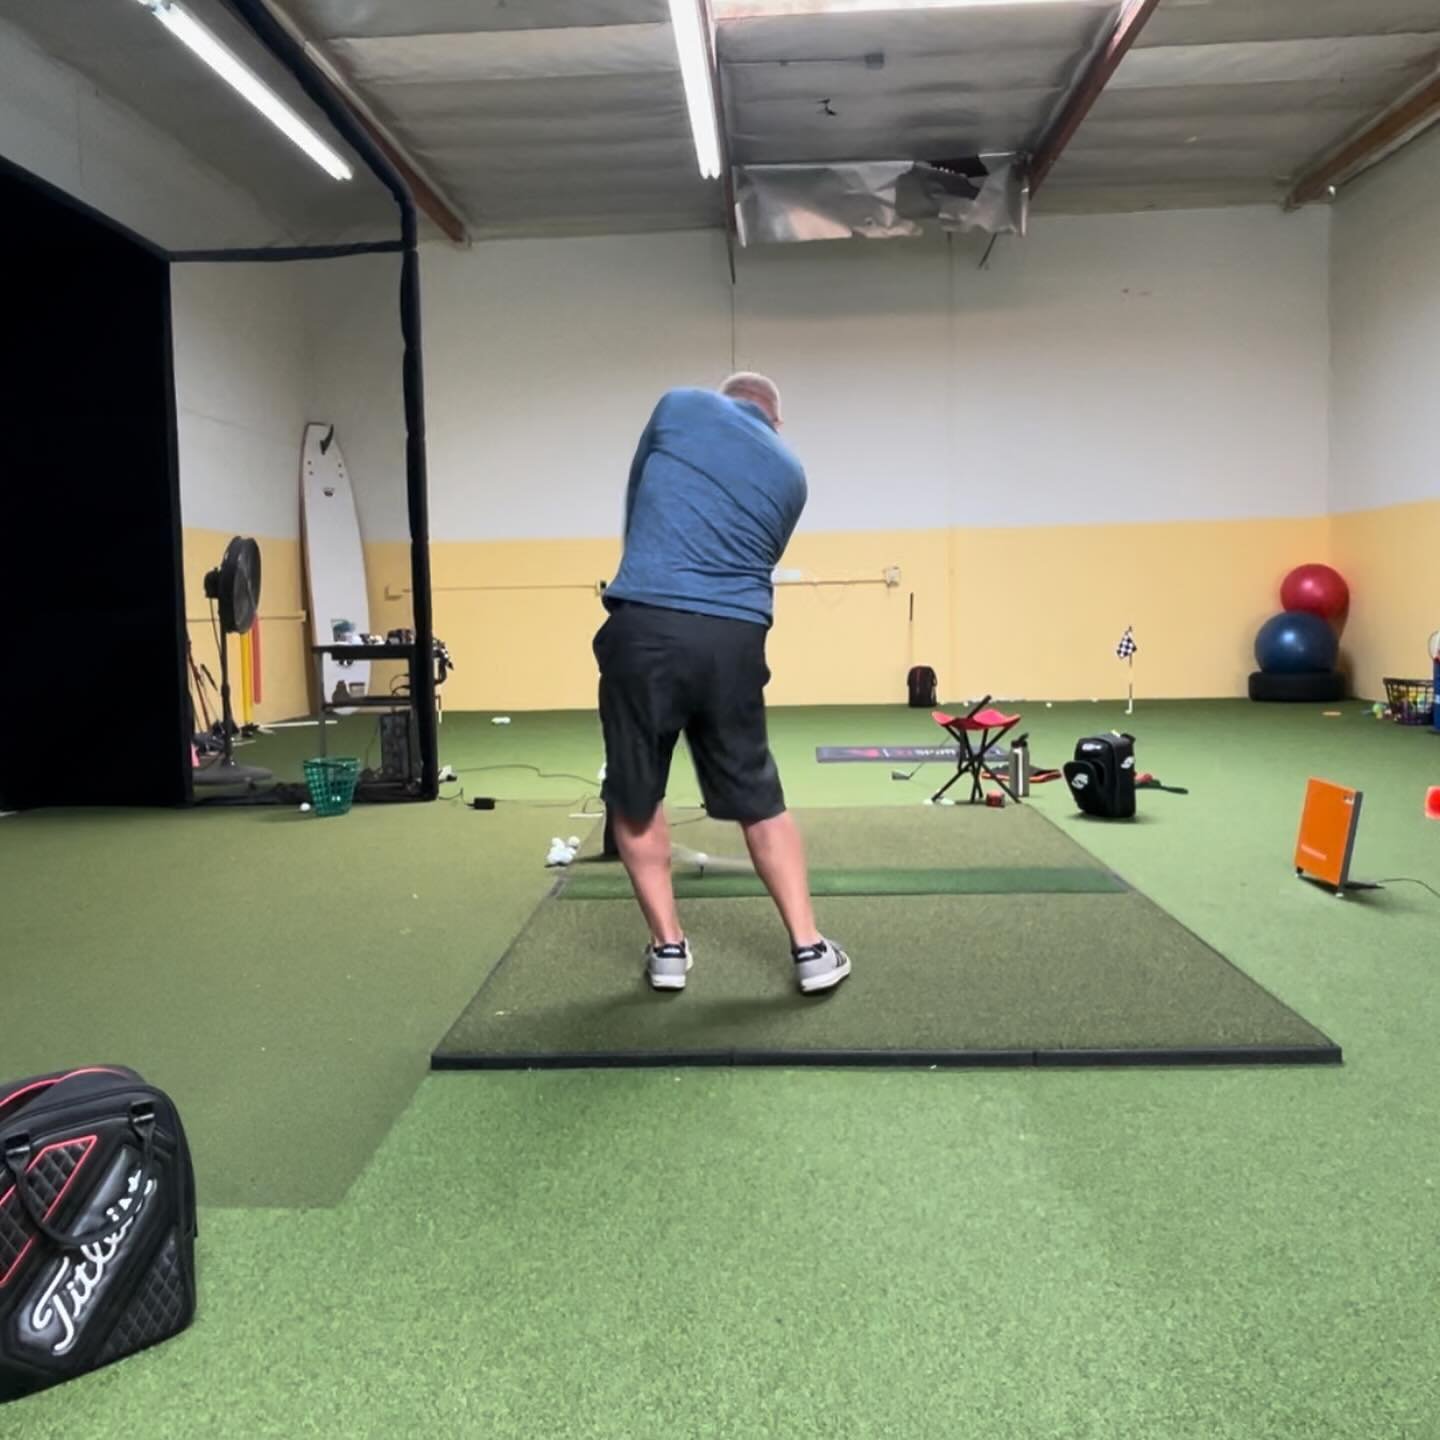 I hosted @coach.tomczak for couple hours on Friday @ocpgi for some work with his driver. We increased his avg club head speed by 4.7mph with one shot peaking at 101.2mph. We added 33.7 yards to his avg carry distance and improved his total distance b